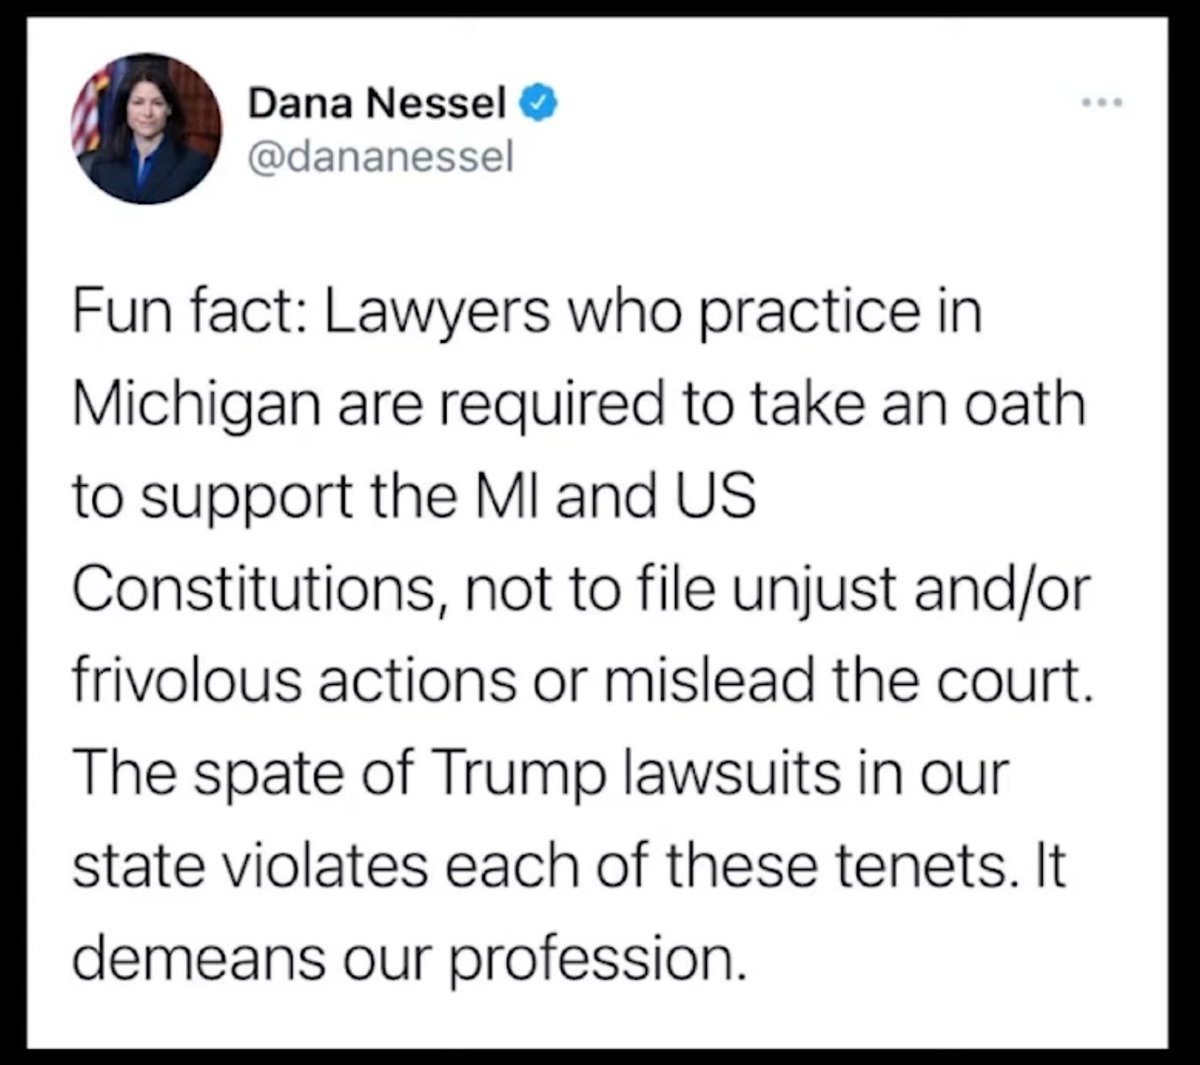 okay, recovered, had some nosh back to the videothey are putting this tweet from  @dananessel on screen, seems Matt takes it as a personal attack, wonder why